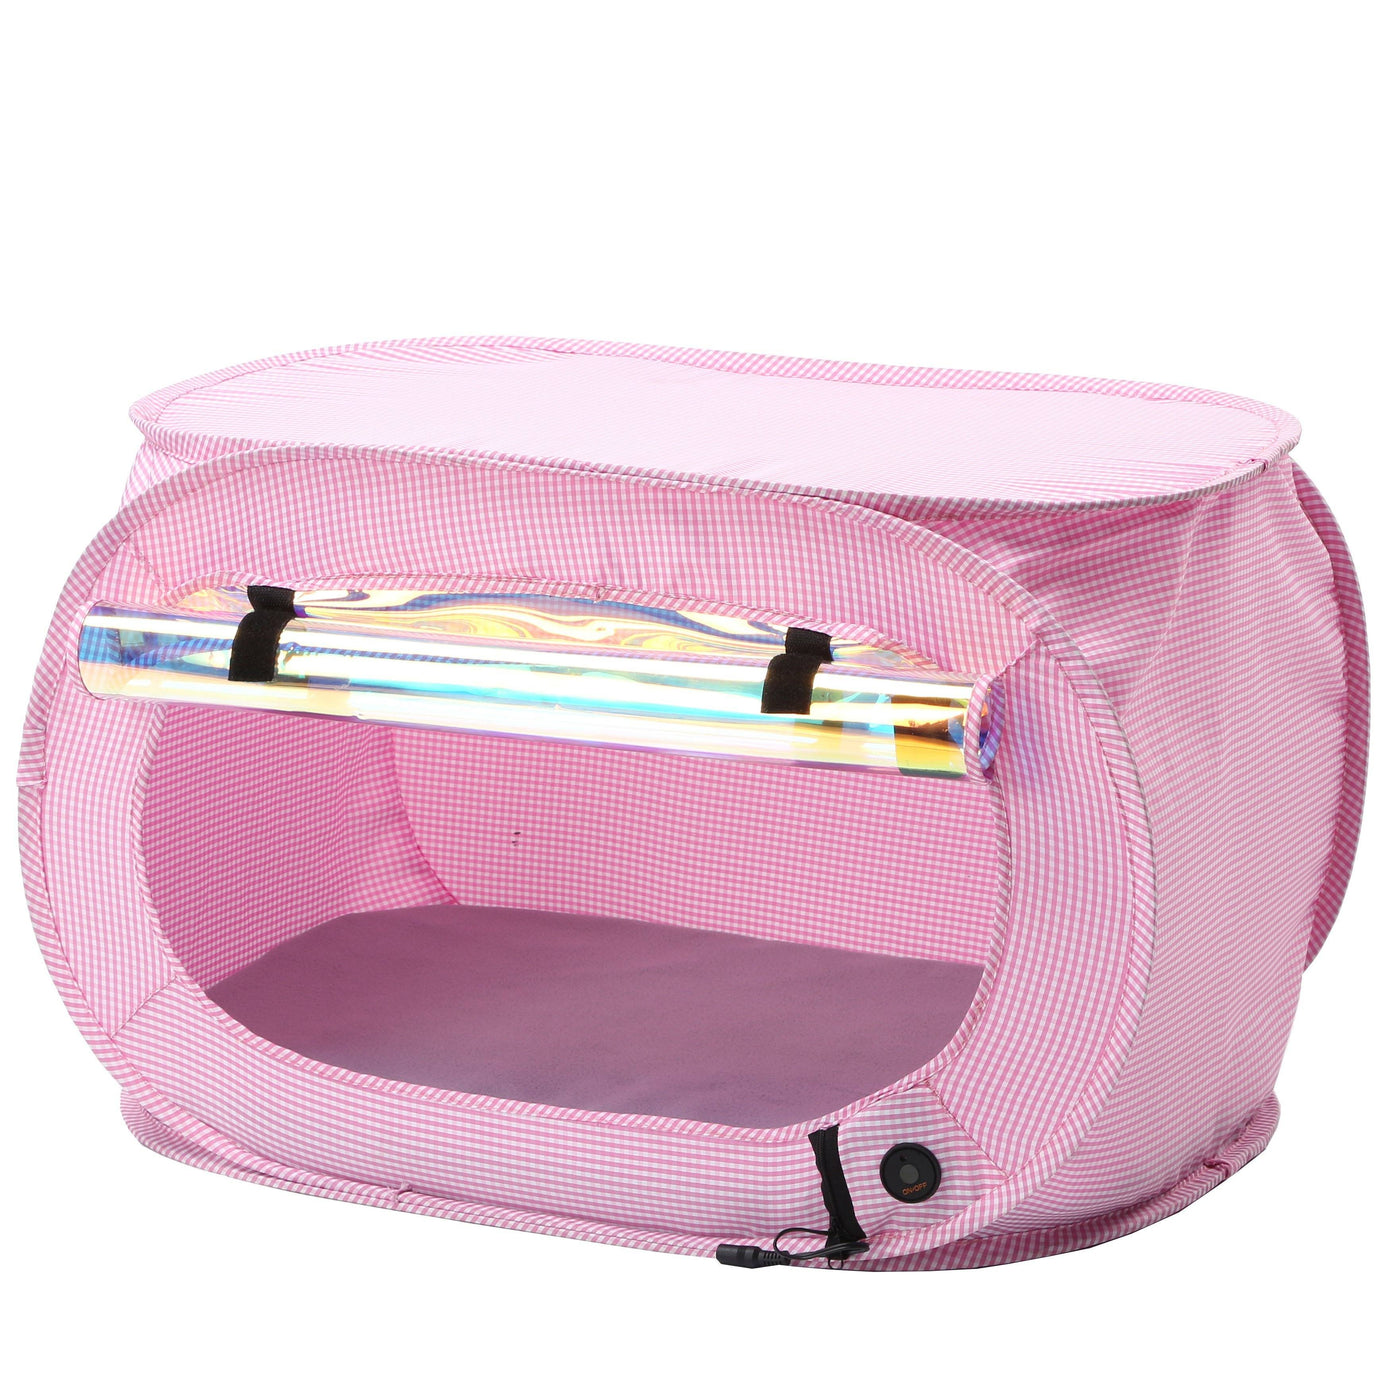 Pet Life Capacious Dual-Expandable Wire Folding Lightweight Collapsible Travel Pet Dog Crate (Pink - X-Small)